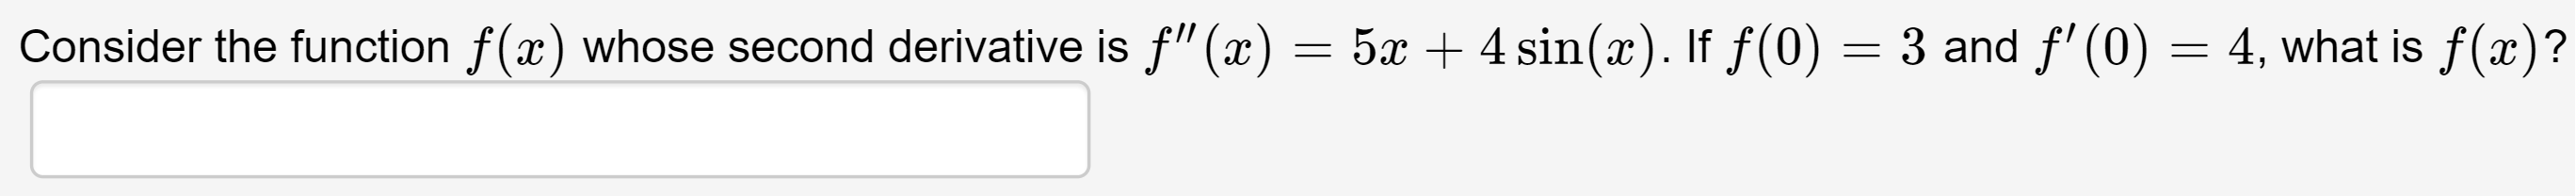 ) = 5 + 4 sin(x). If f(0) = 3 and f' (0) = 4, what is f(x)?
Consider the function f(x) whose second derivative is f"(x
